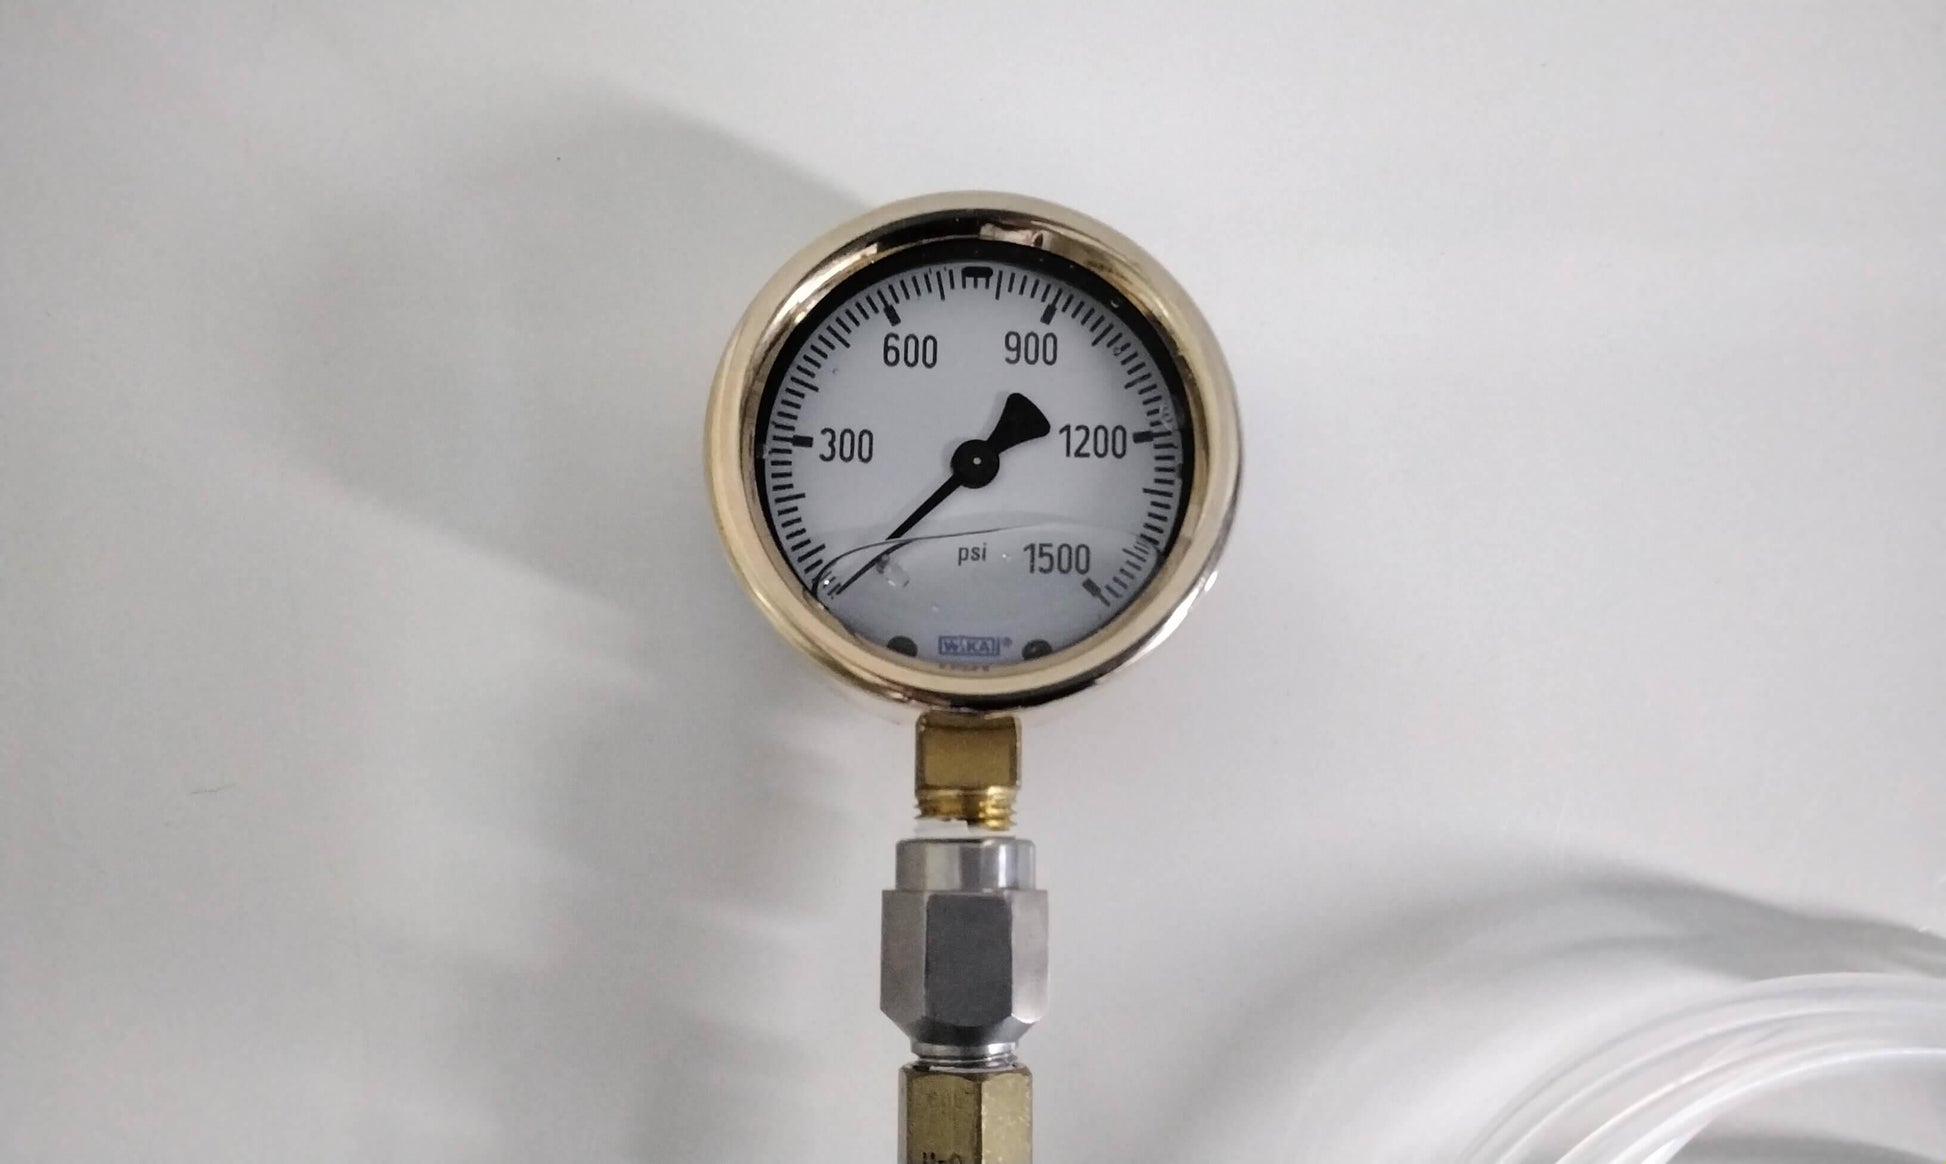 USED Wika Utility Pressure Gauge 0-1500 PSI CCN6945 with Fixture and Tubing Free Shipping and Warranty - MBR Medicals